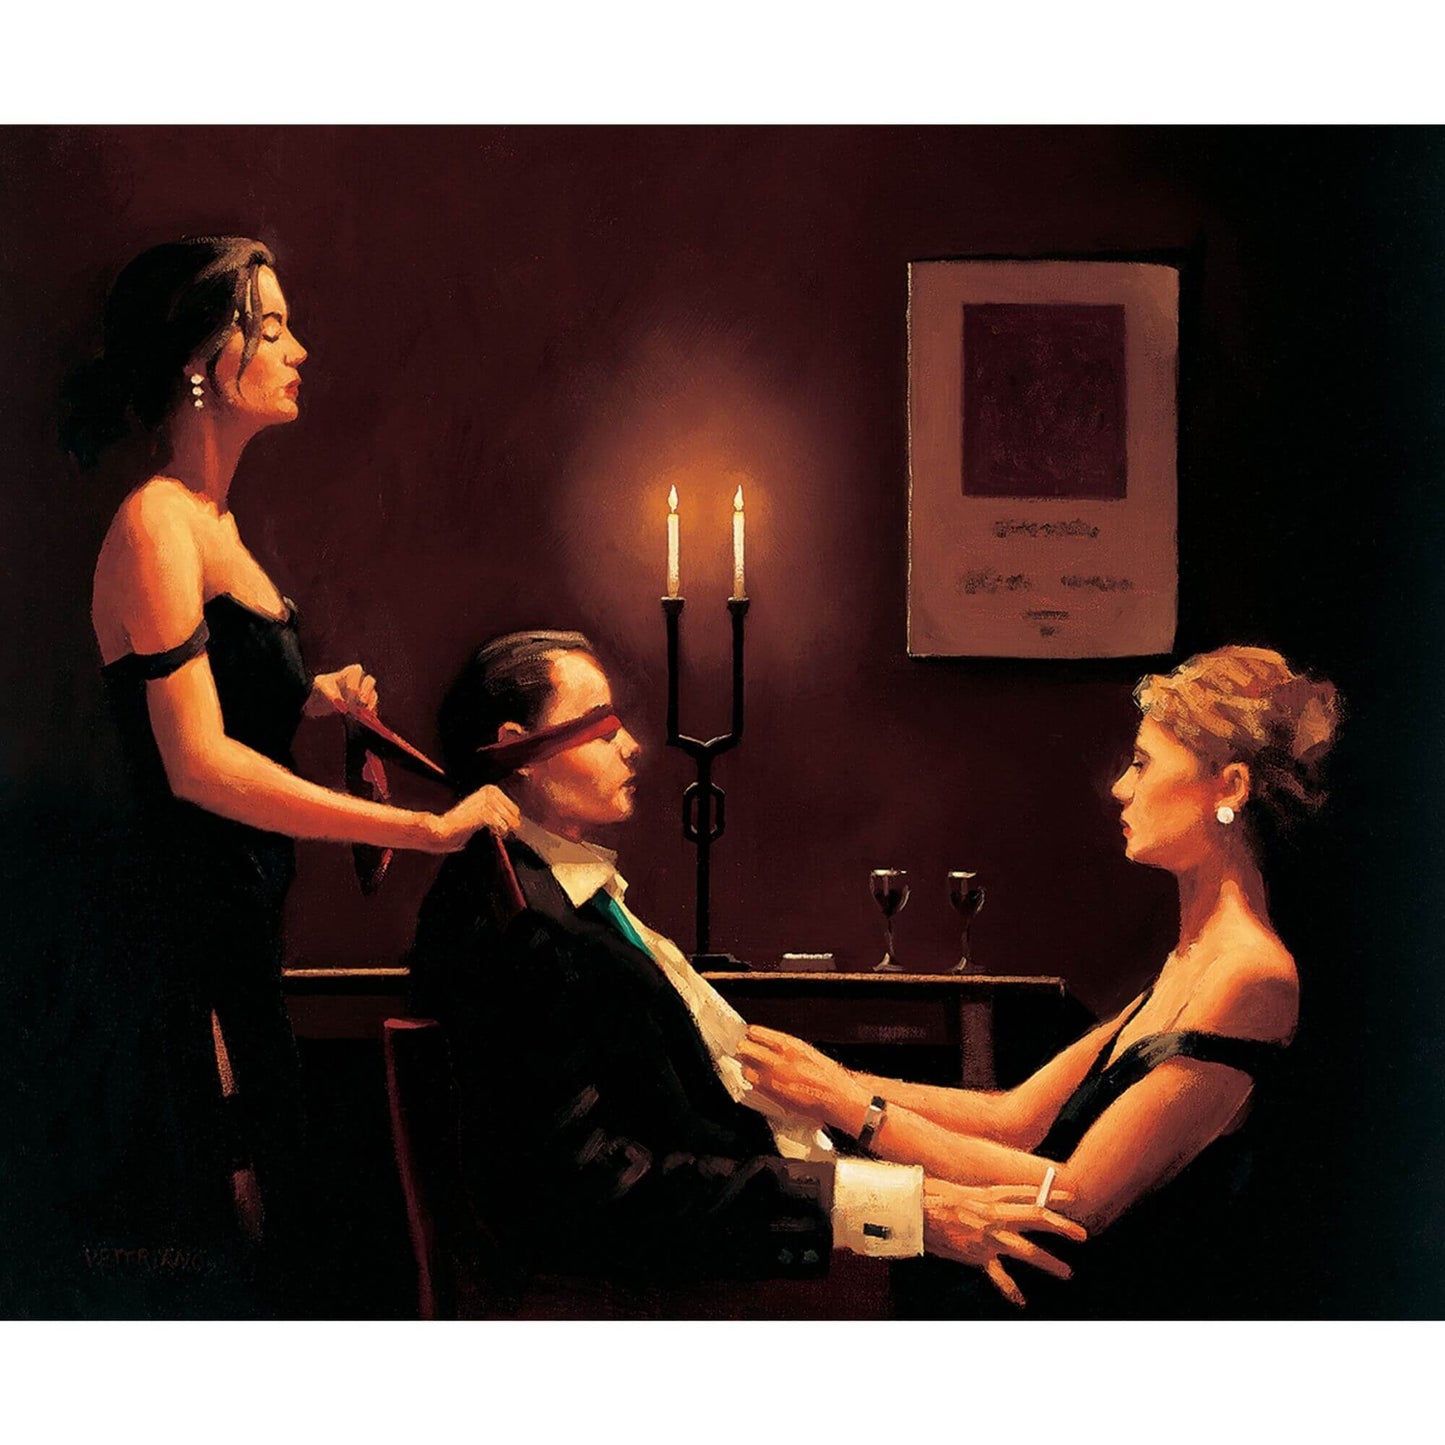 Wicked Games by Jack Vettriano